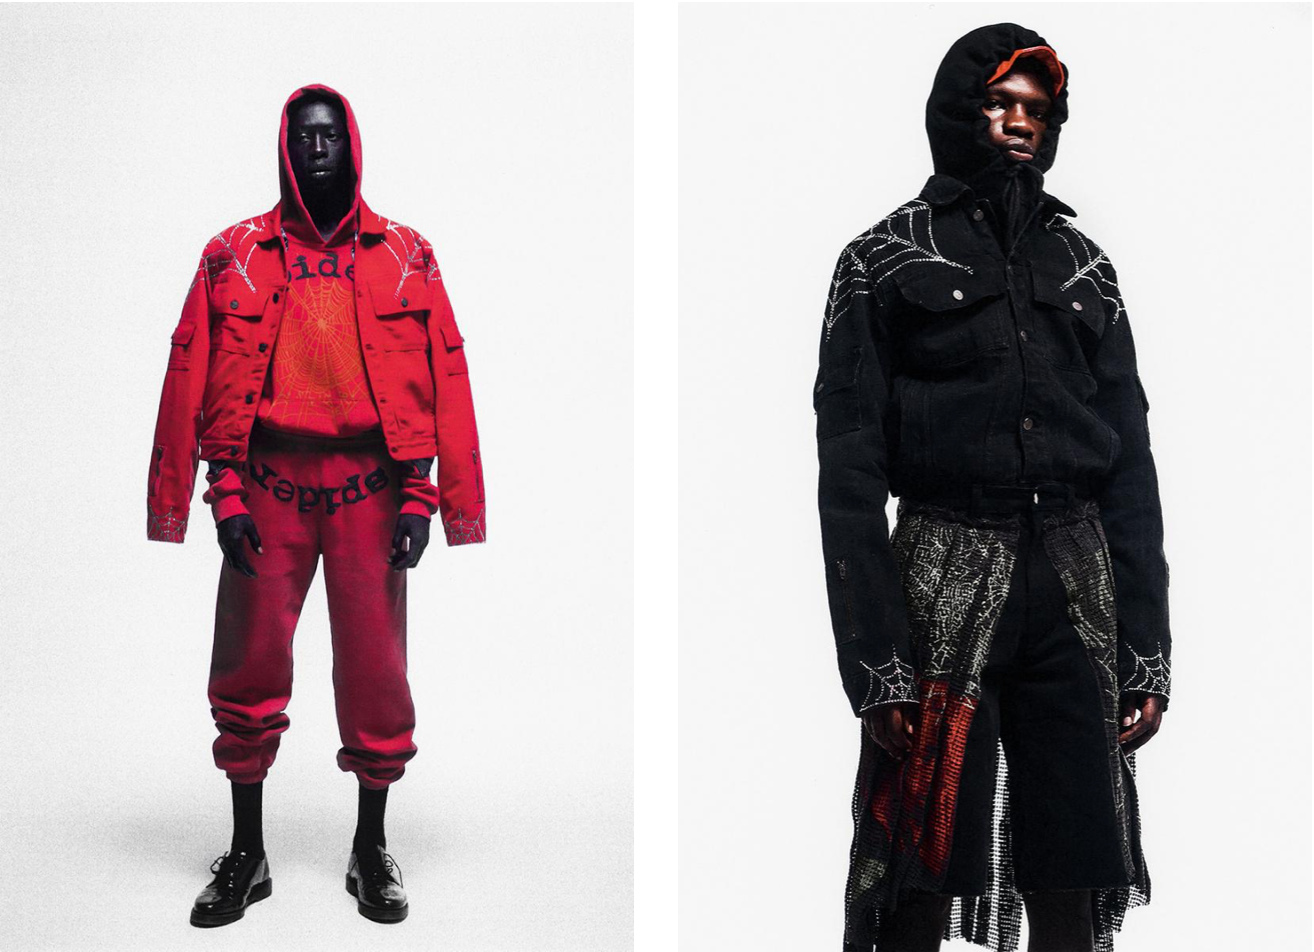 YOUNG THUG'S FIRST "SPIDER" COLLECTION LOOKBOOK